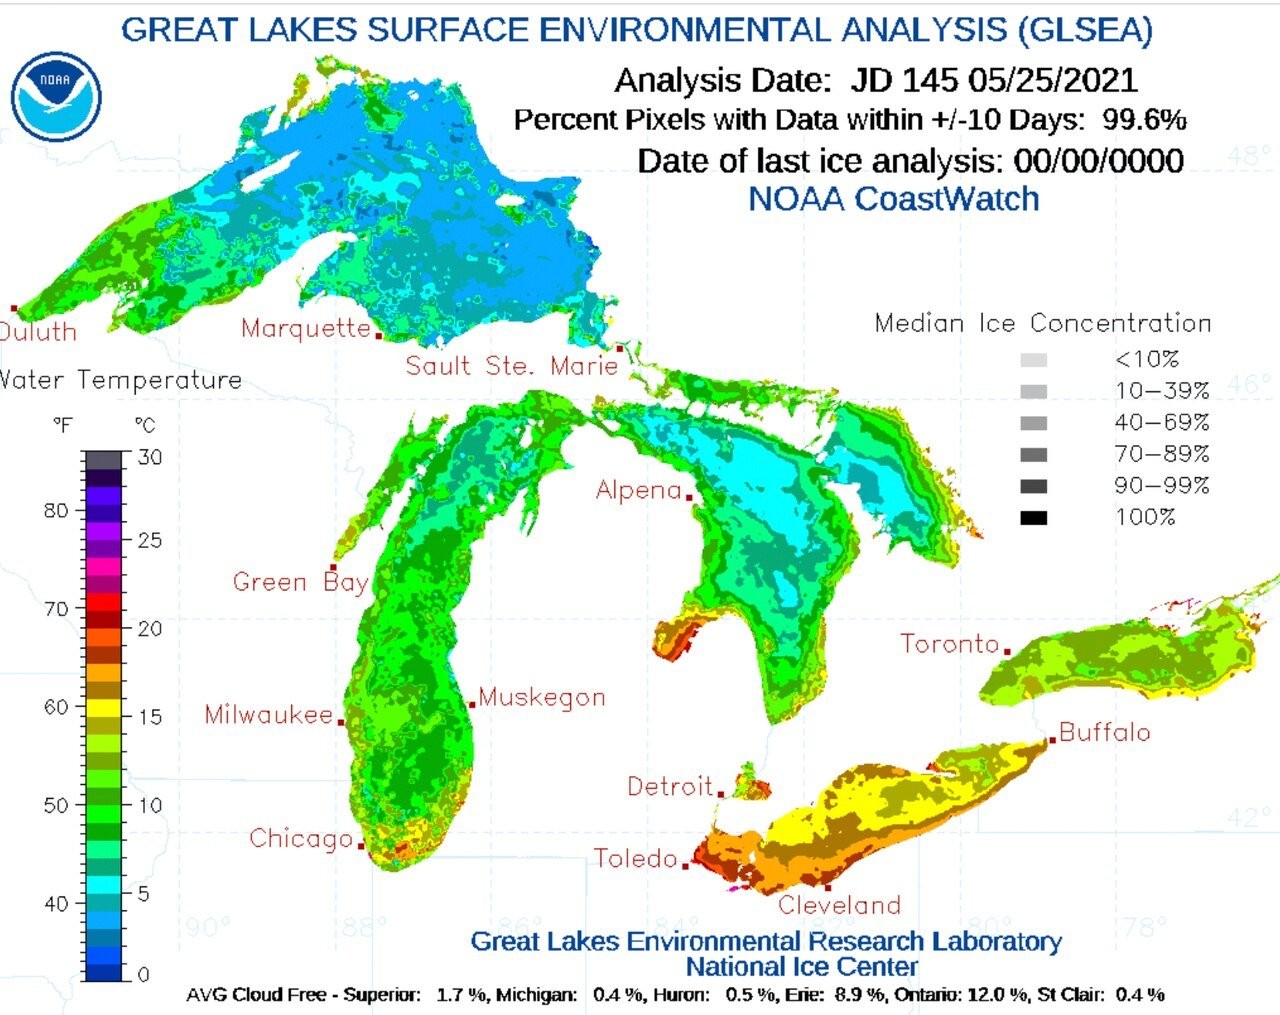 All Great Lakes are warmer than normal now